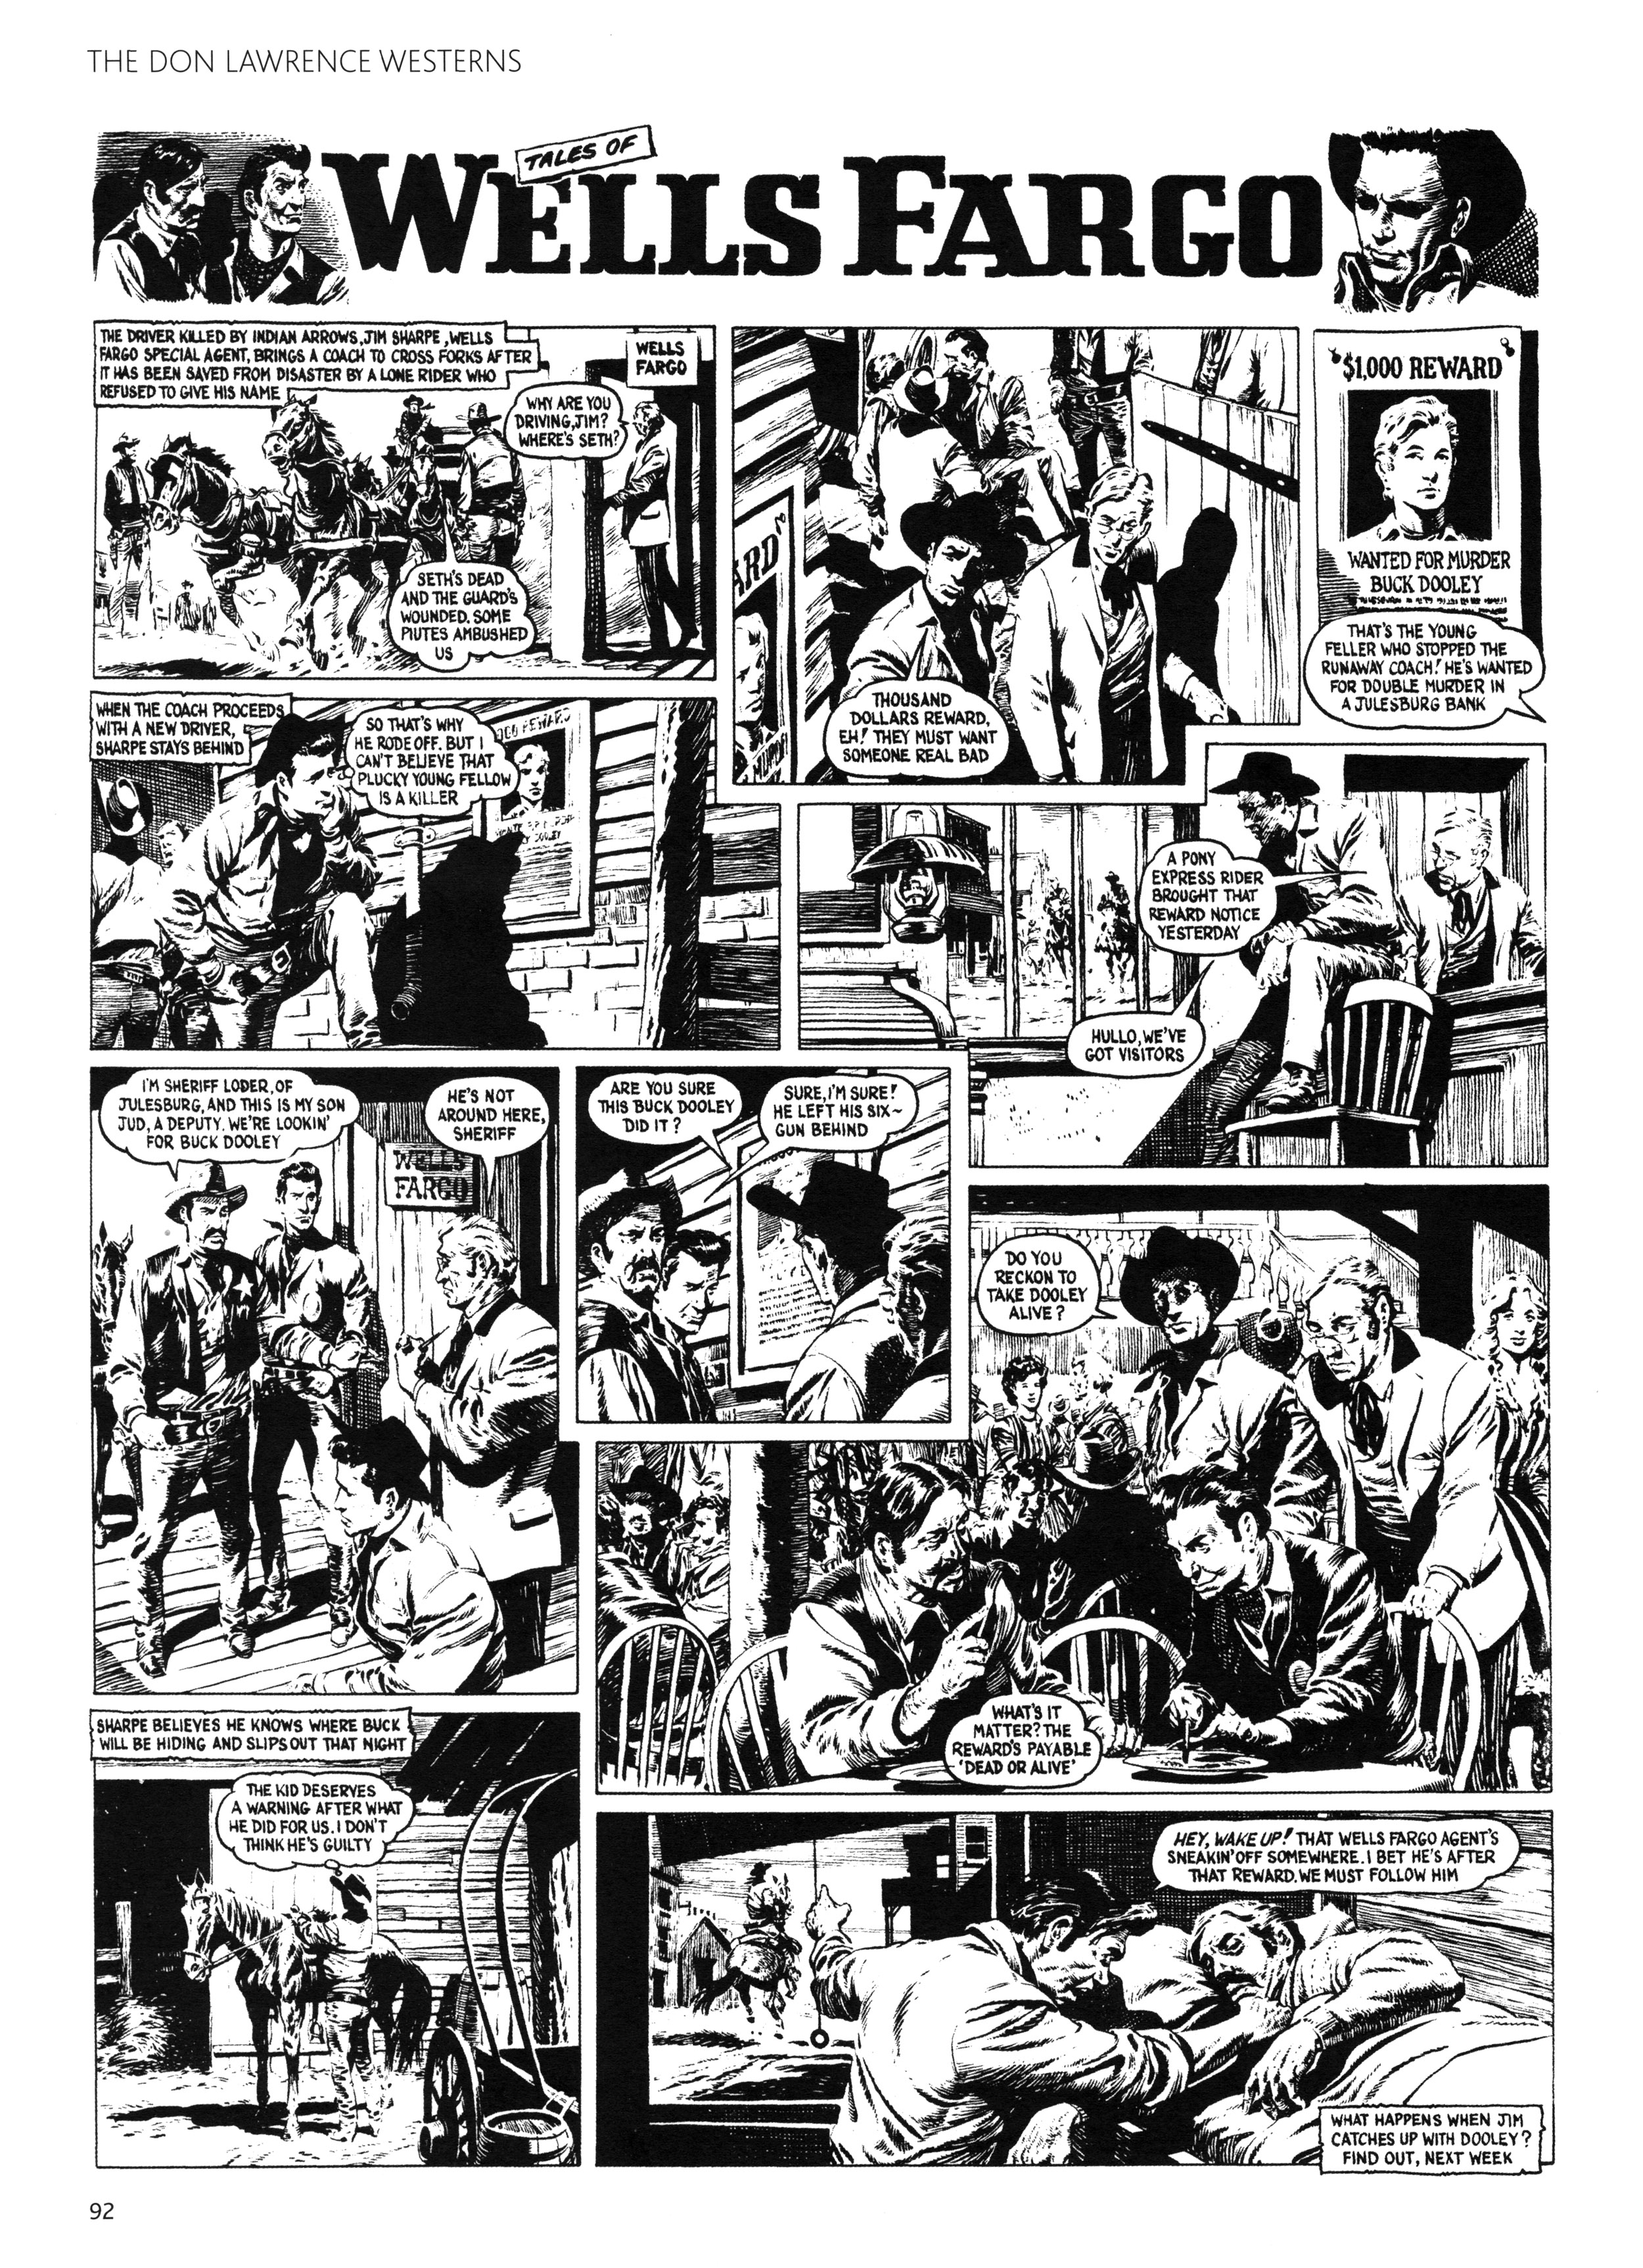 Read online Don Lawrence Westerns comic -  Issue # TPB (Part 1) - 96